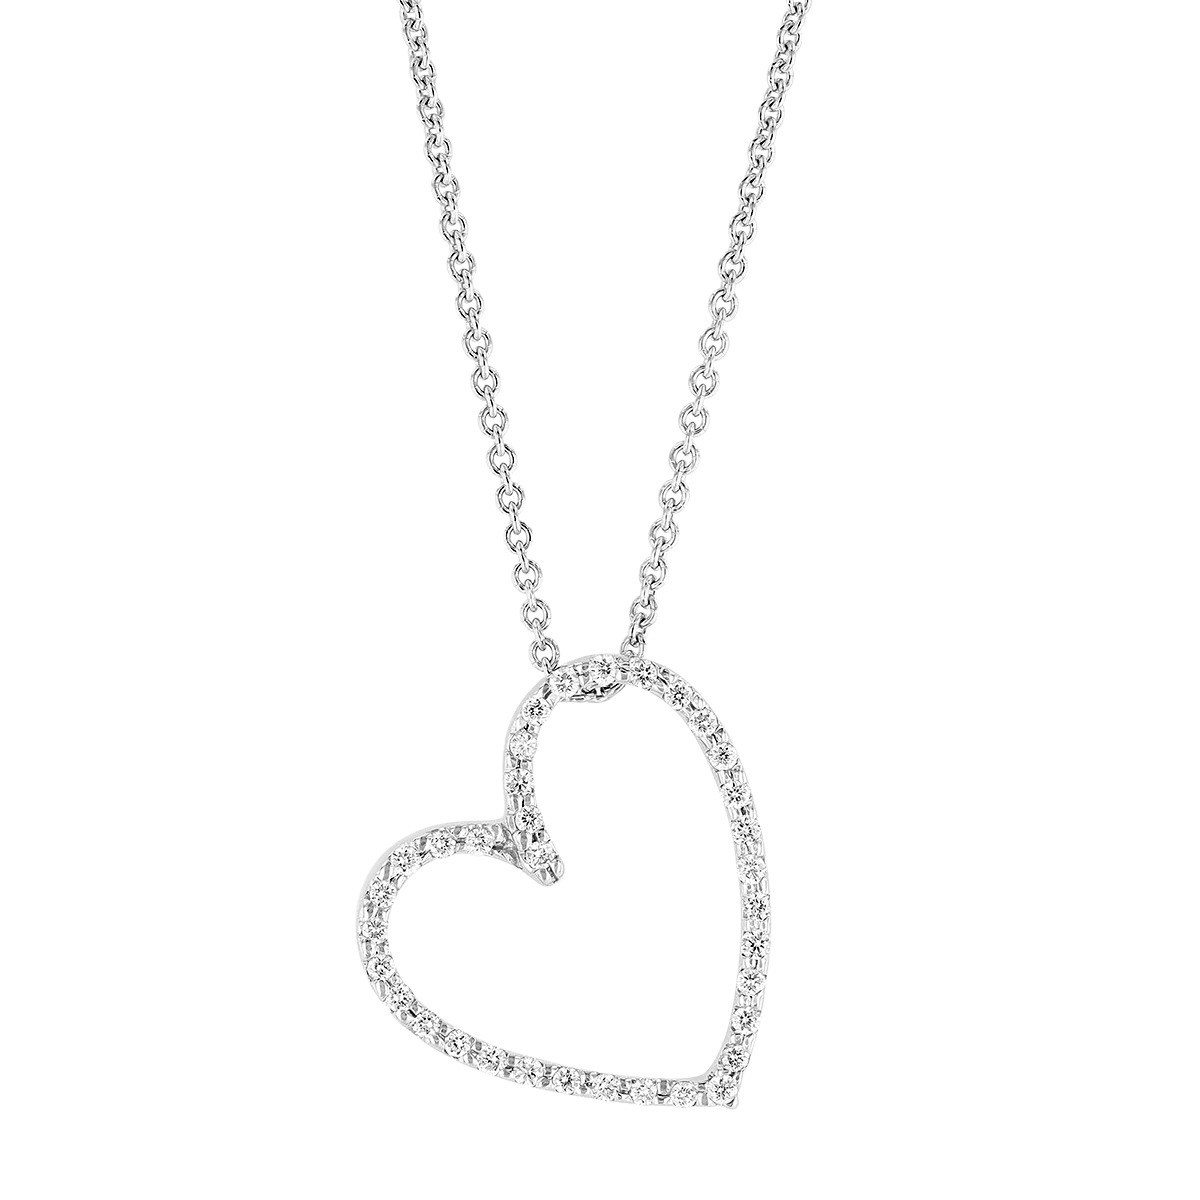 Tilted Diamond Heart Necklace in White Gold, 0.11 cttw | Borsheims